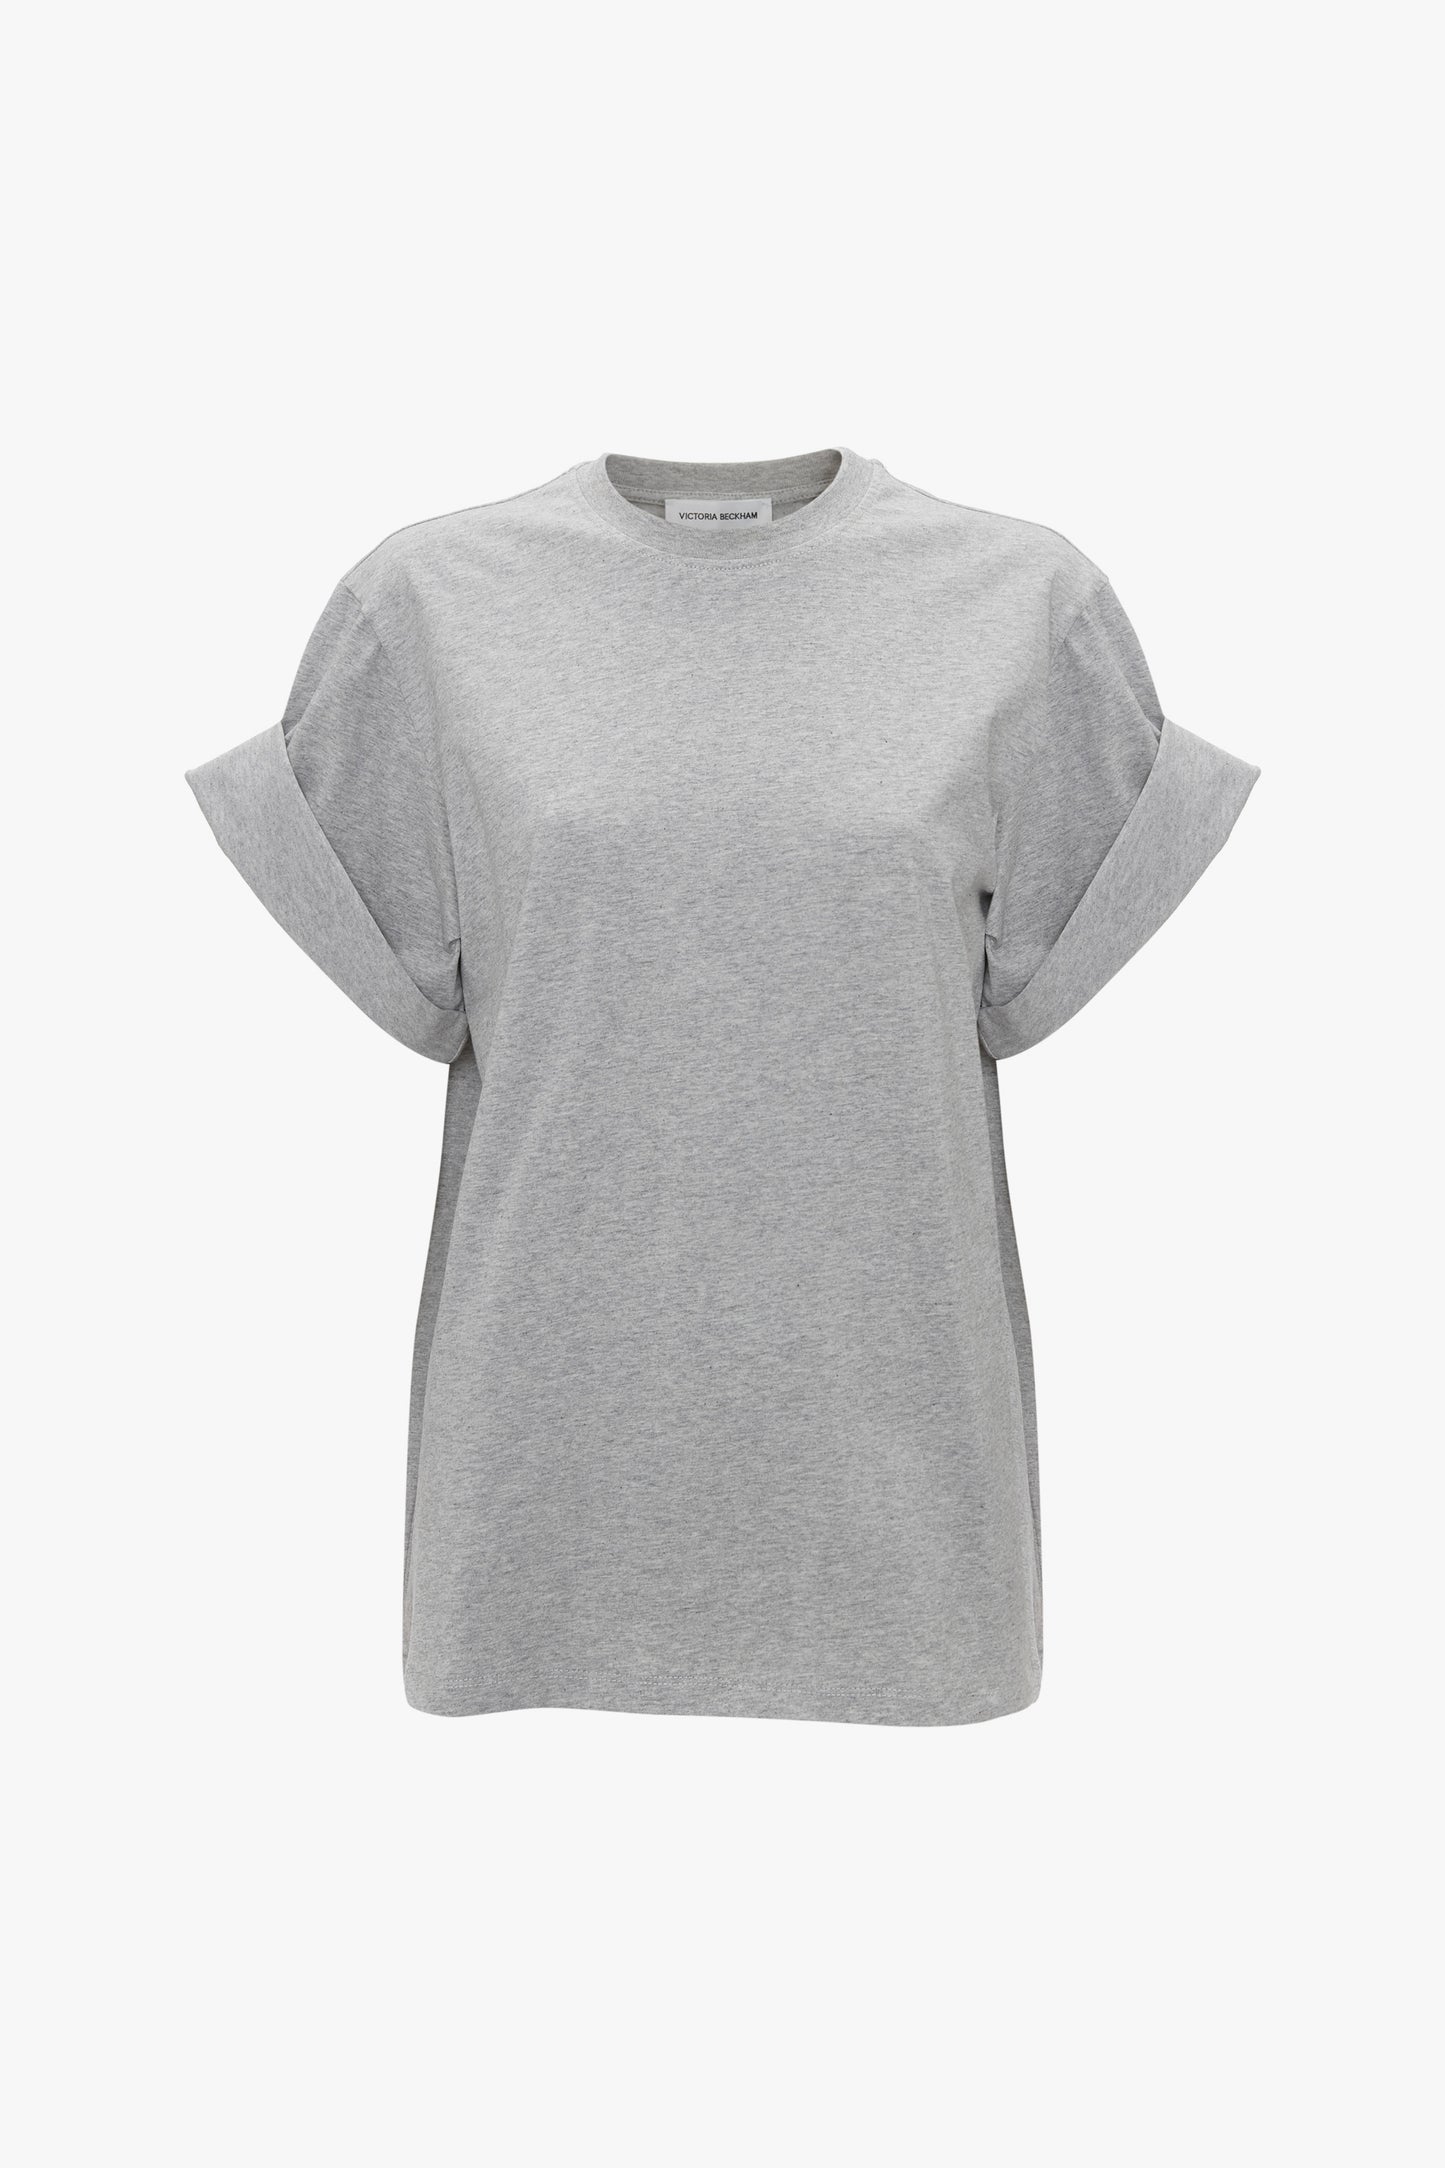 Relaxed Fit T-Shirt In Grey Marl